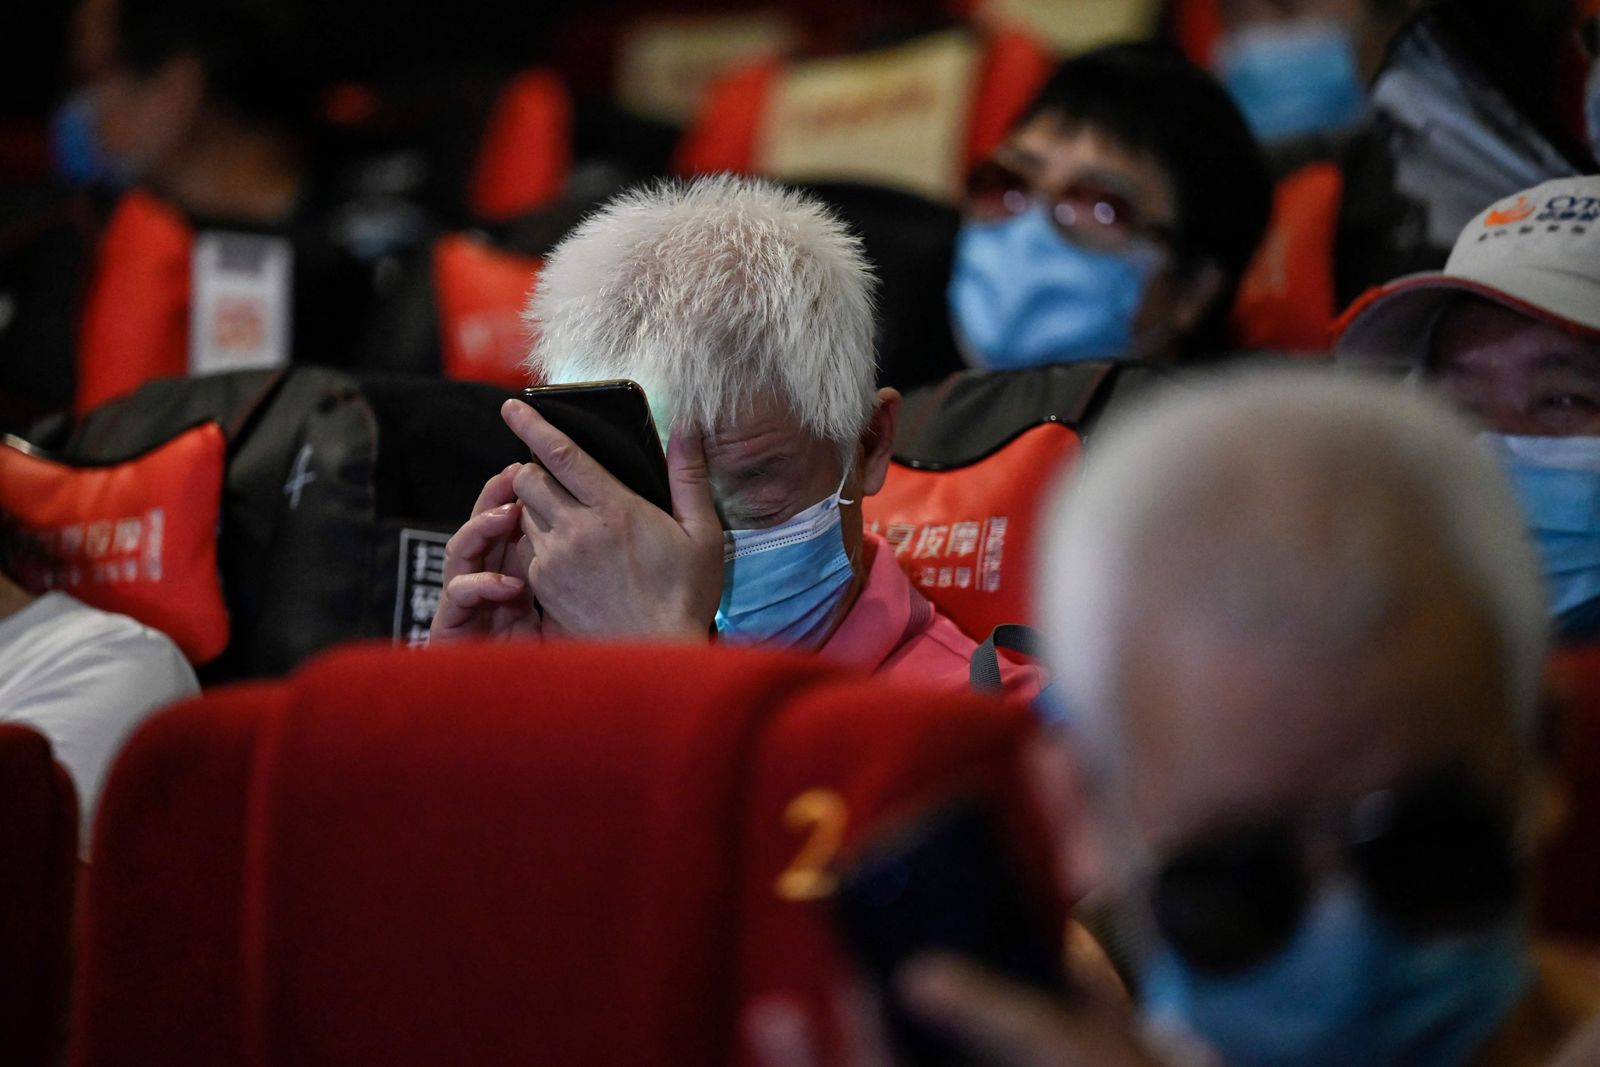 This photo taken on August 7, 2021 shows a visually impaired man listening to his phone at a cinema in Beijing. - Dozens of blind moviegoers come to the Saturday screenings organised by Xin Mu Theater, a small group of volunteers who were the first to introduce films to blind audiences in China. (Photo by Jade GAO / AFP) / To go with AFP story China-social-disabled-film, FEATURE by Poornima WEERASEKARA and Danni ZHU - AFP